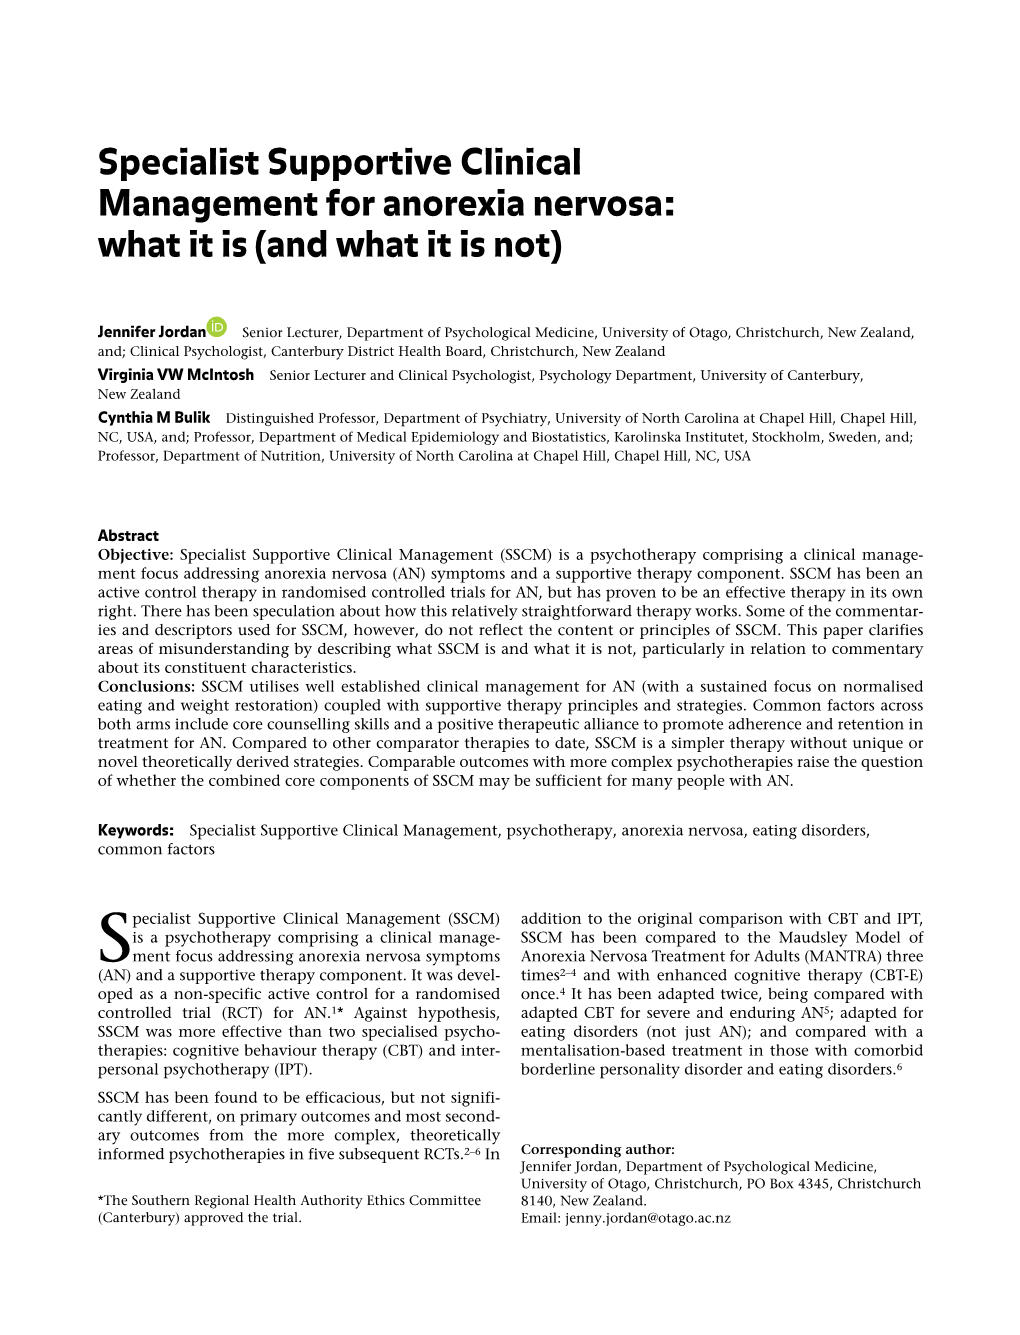 Specialist Supportive Clinical Management for Anorexia Nervosa: What It Is (And What It Is Not)